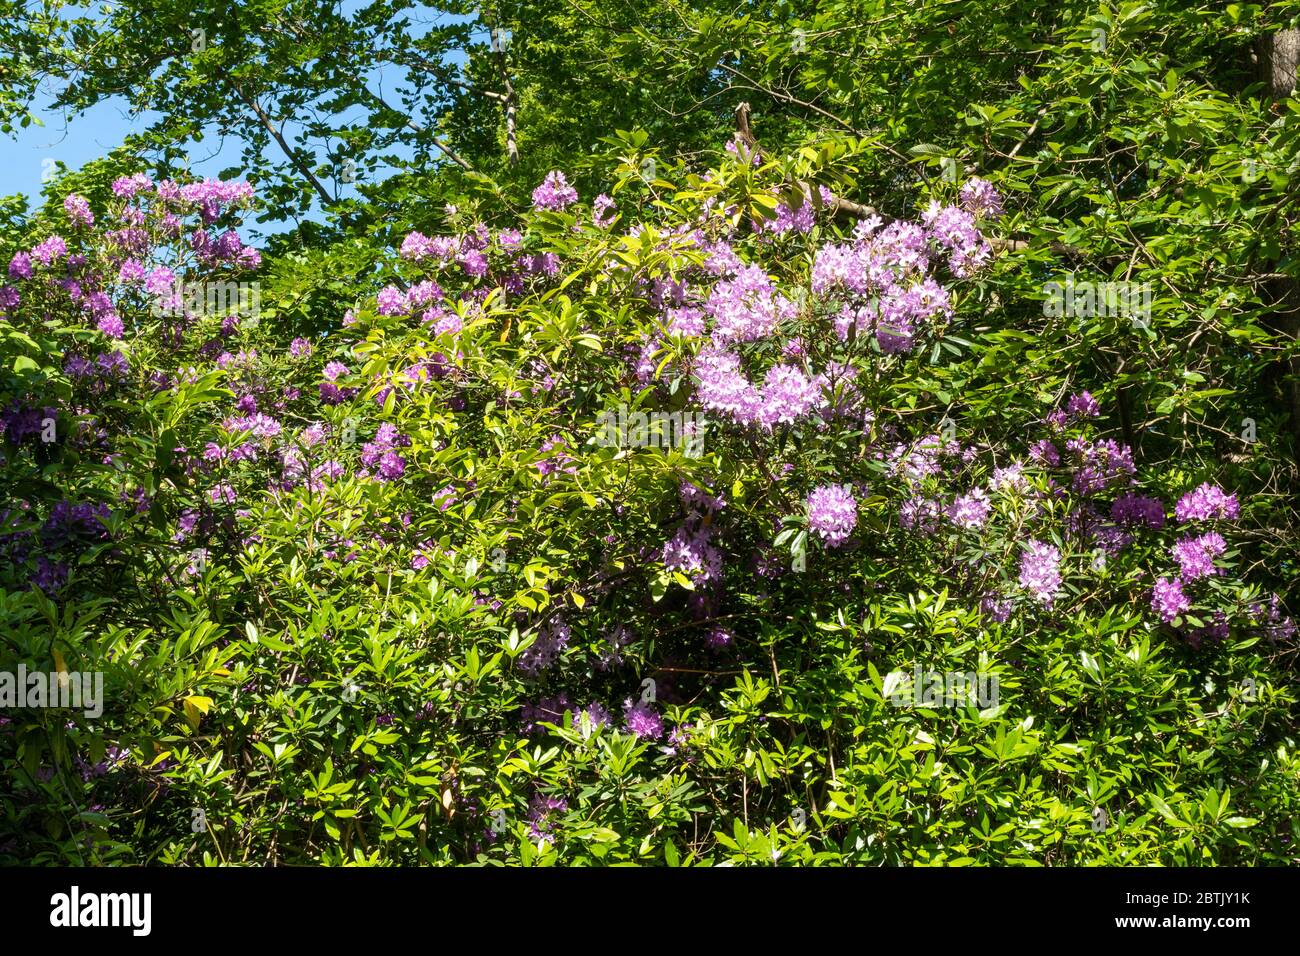 Common rhododendrons (Rhododendron ponticum) in flower by the road in Fleet, Hampshire, UK. Rhododendrons are a non-native invasive plant in the UK. Stock Photo